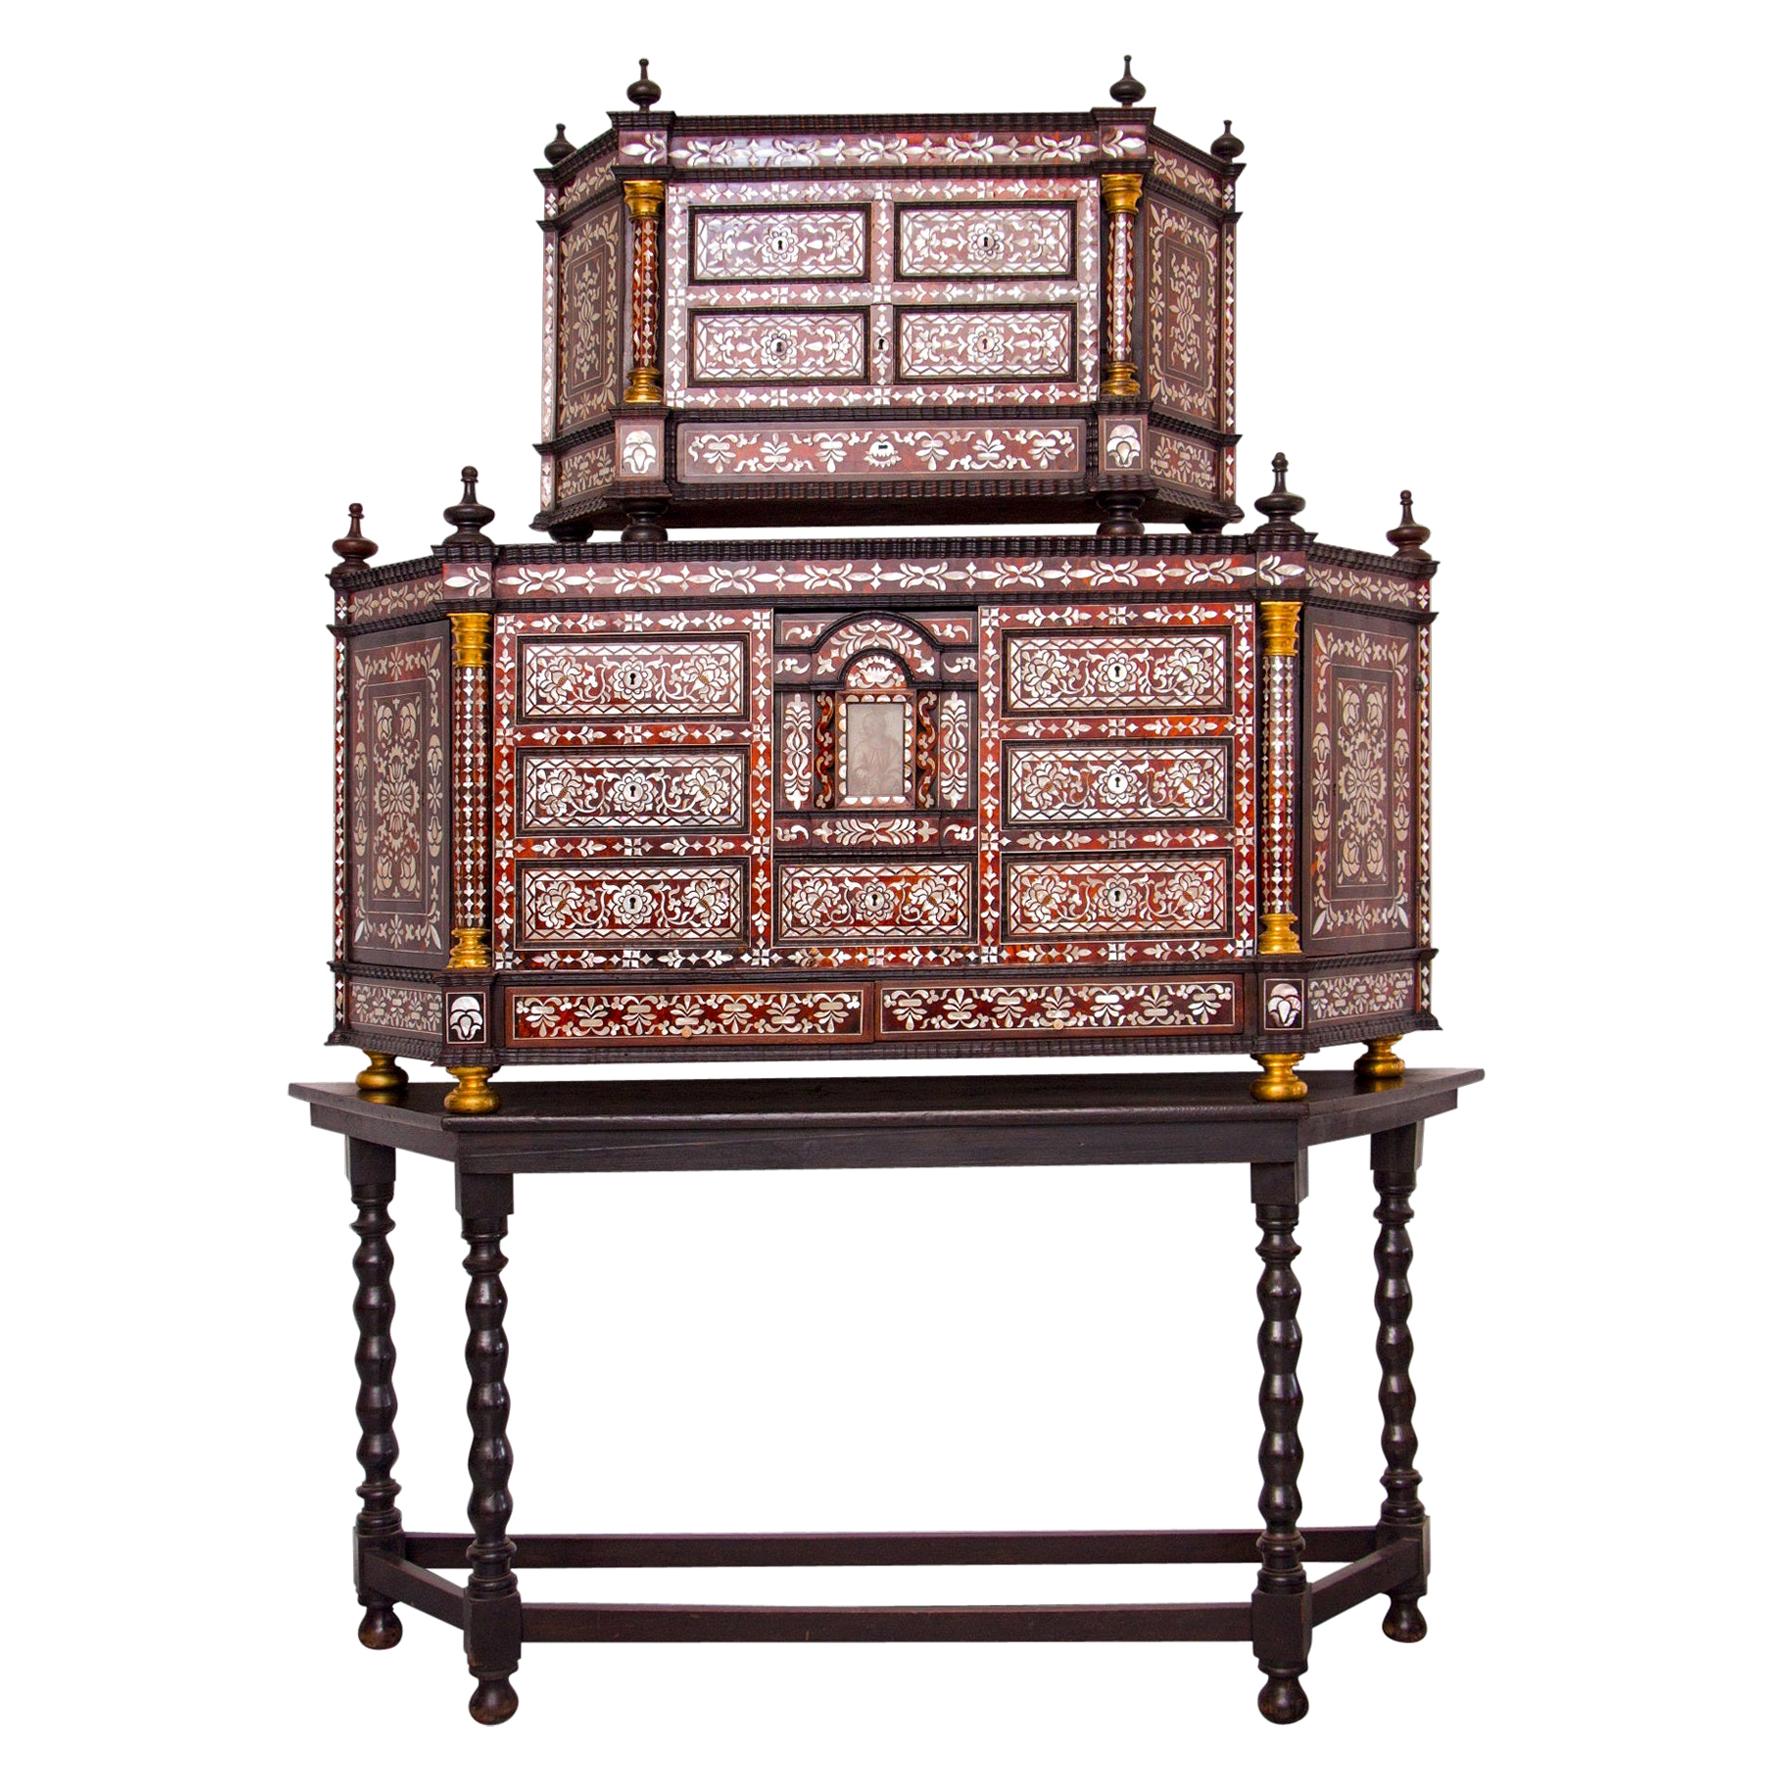 Mexican Cabinet with Nacar Shell Inlays, the Base and the Columns are Bronze